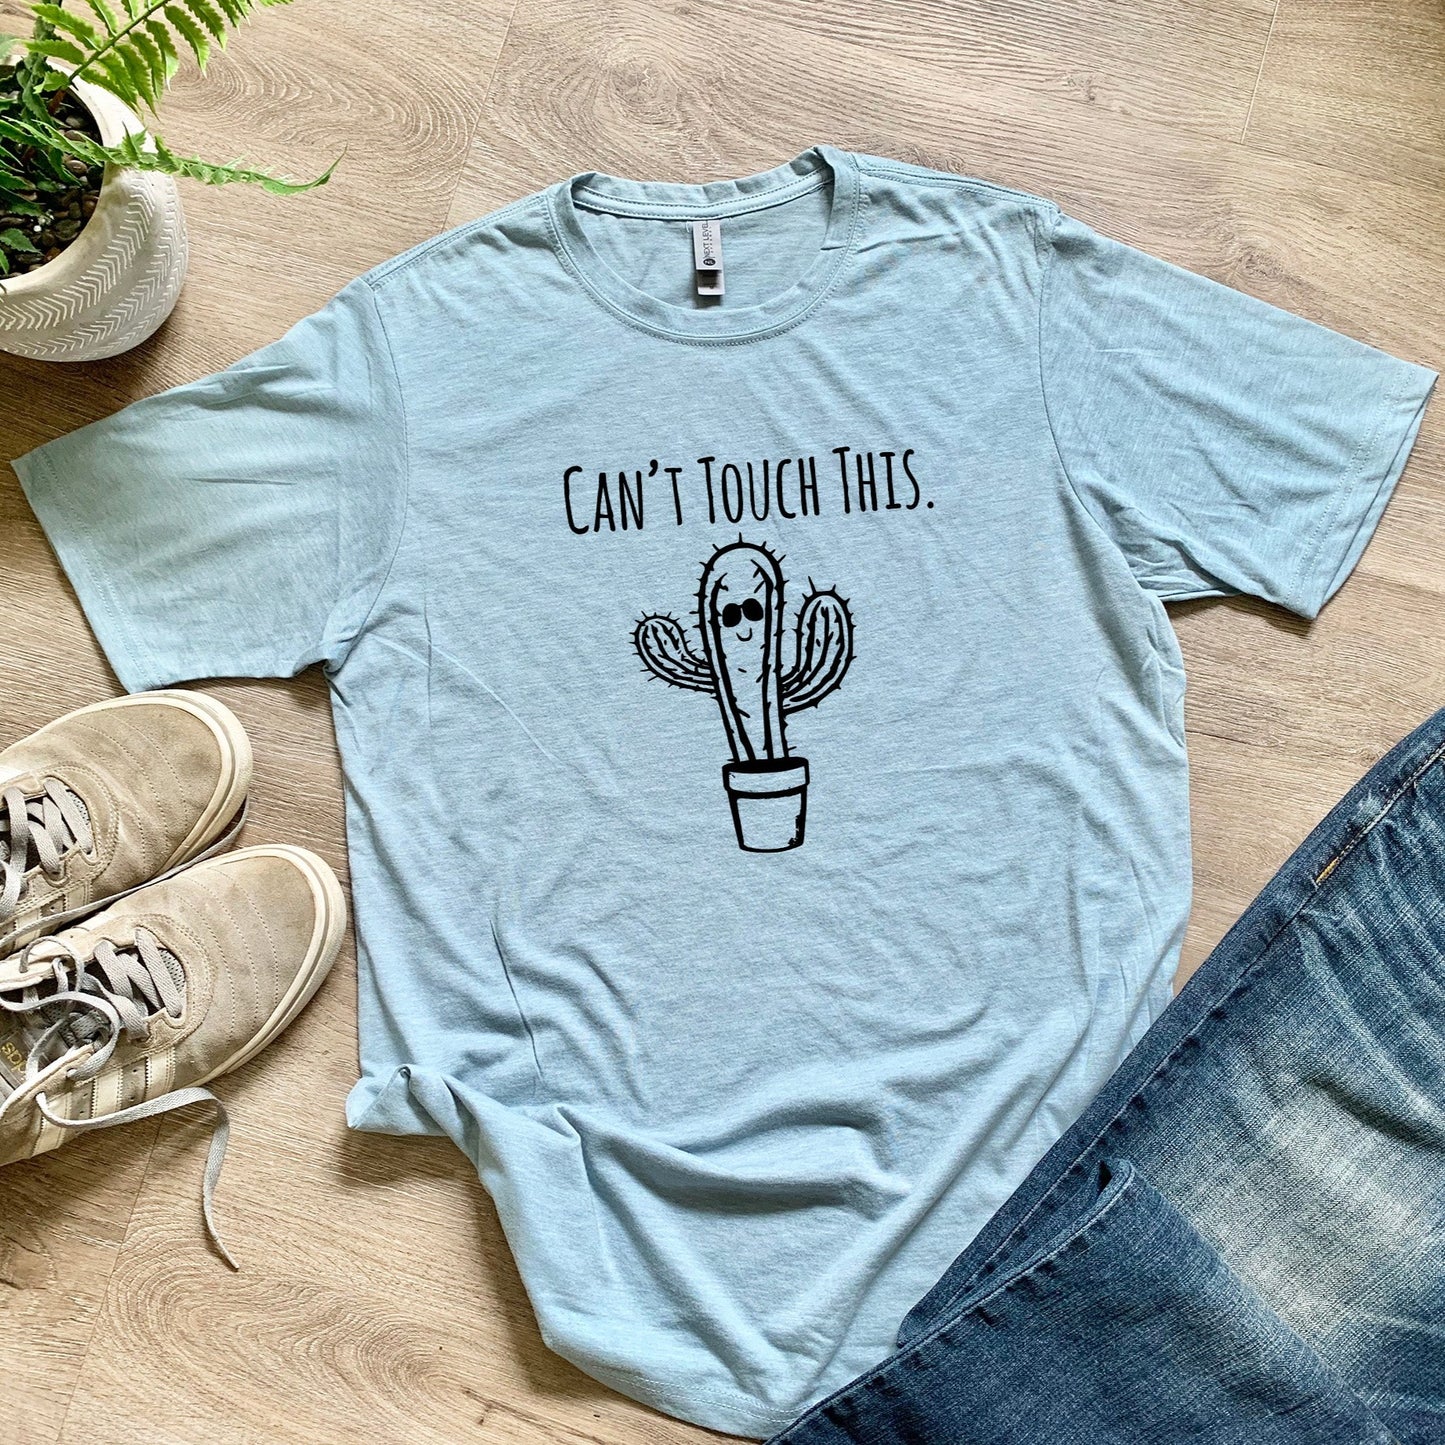 Can't Touch This (Cactus) - Men's / Unisex Tee - Stonewash Blue or Sage